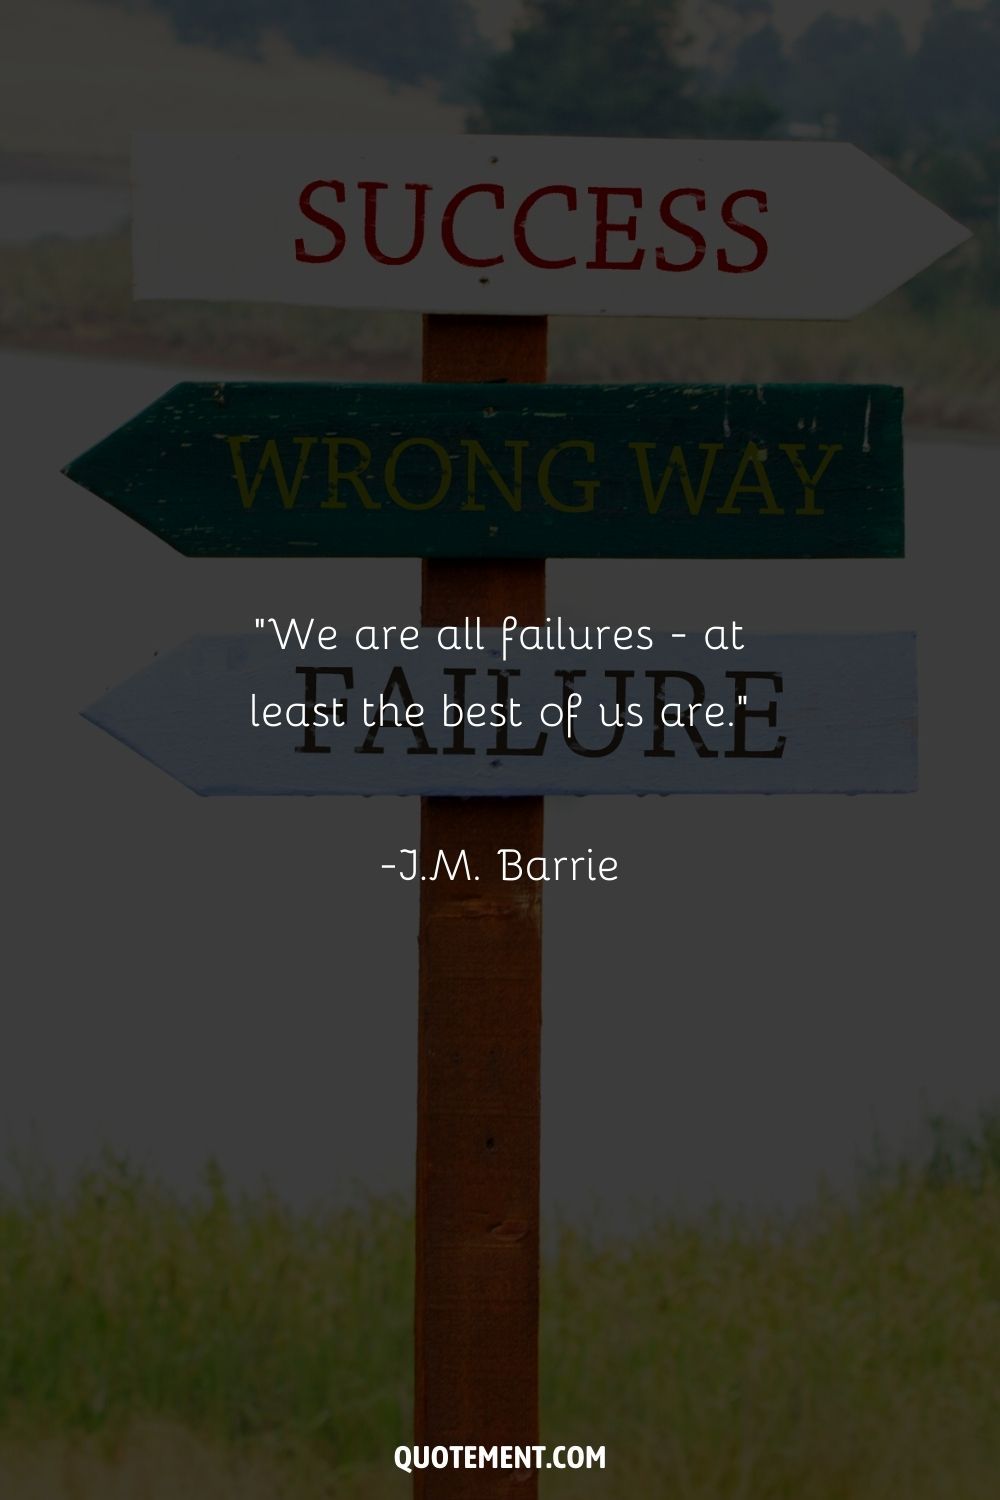 “We are all failures- at least the best of us are.” ― J.M. Barrie